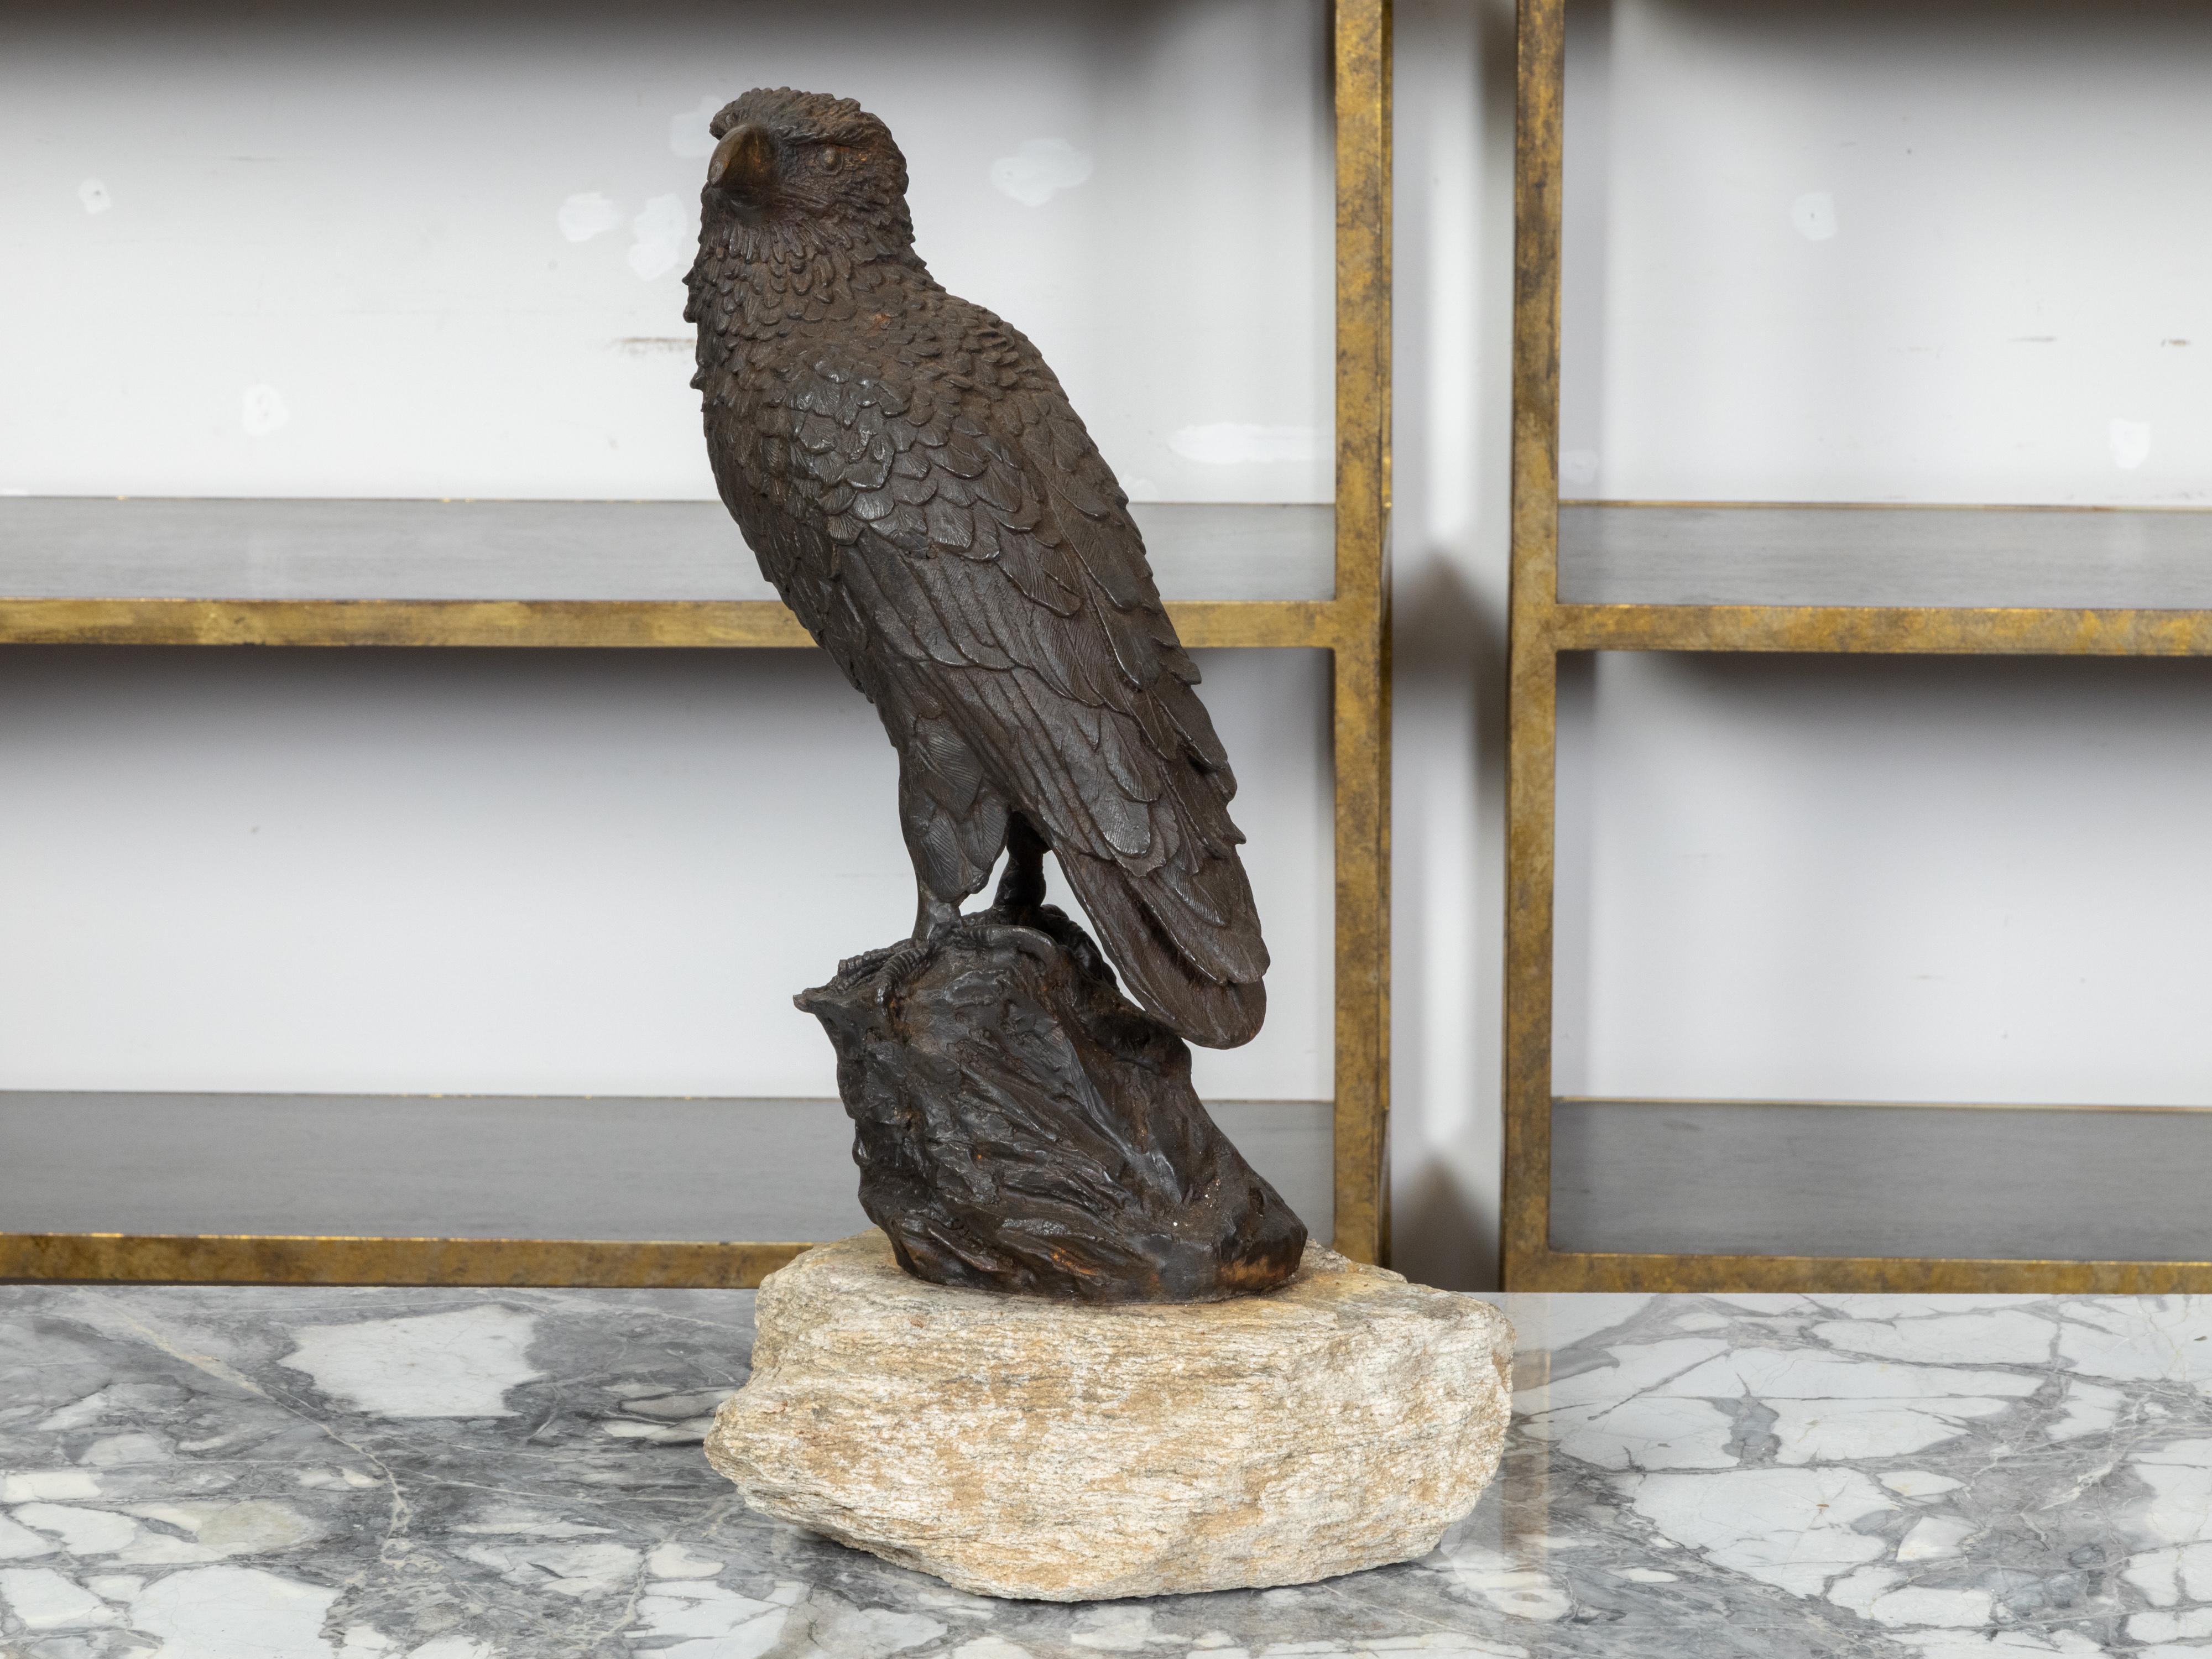 An English iron sculpture from the early 20th century depicting an eagle perched on a rock, with dark brown patina. Created in England during the Turn of the Century which saw the transition between the 19th to the 20th century, this iron sculpture